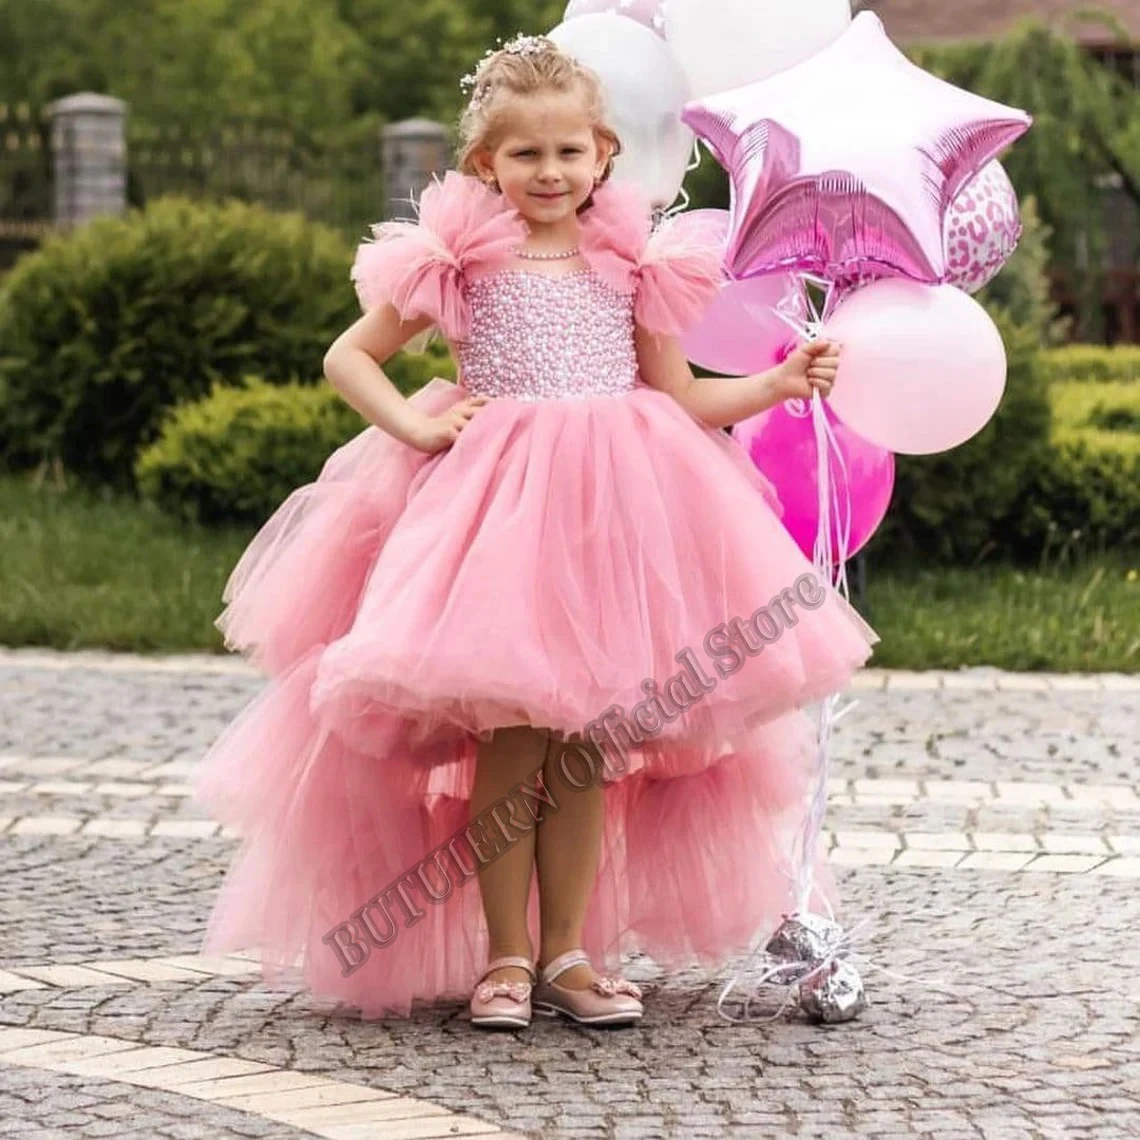 

Pink Puffy Flower Girl Dresses With Detachable Train Girls Pearls Couture Birthday Wedding Party Dresses Costumes Customised